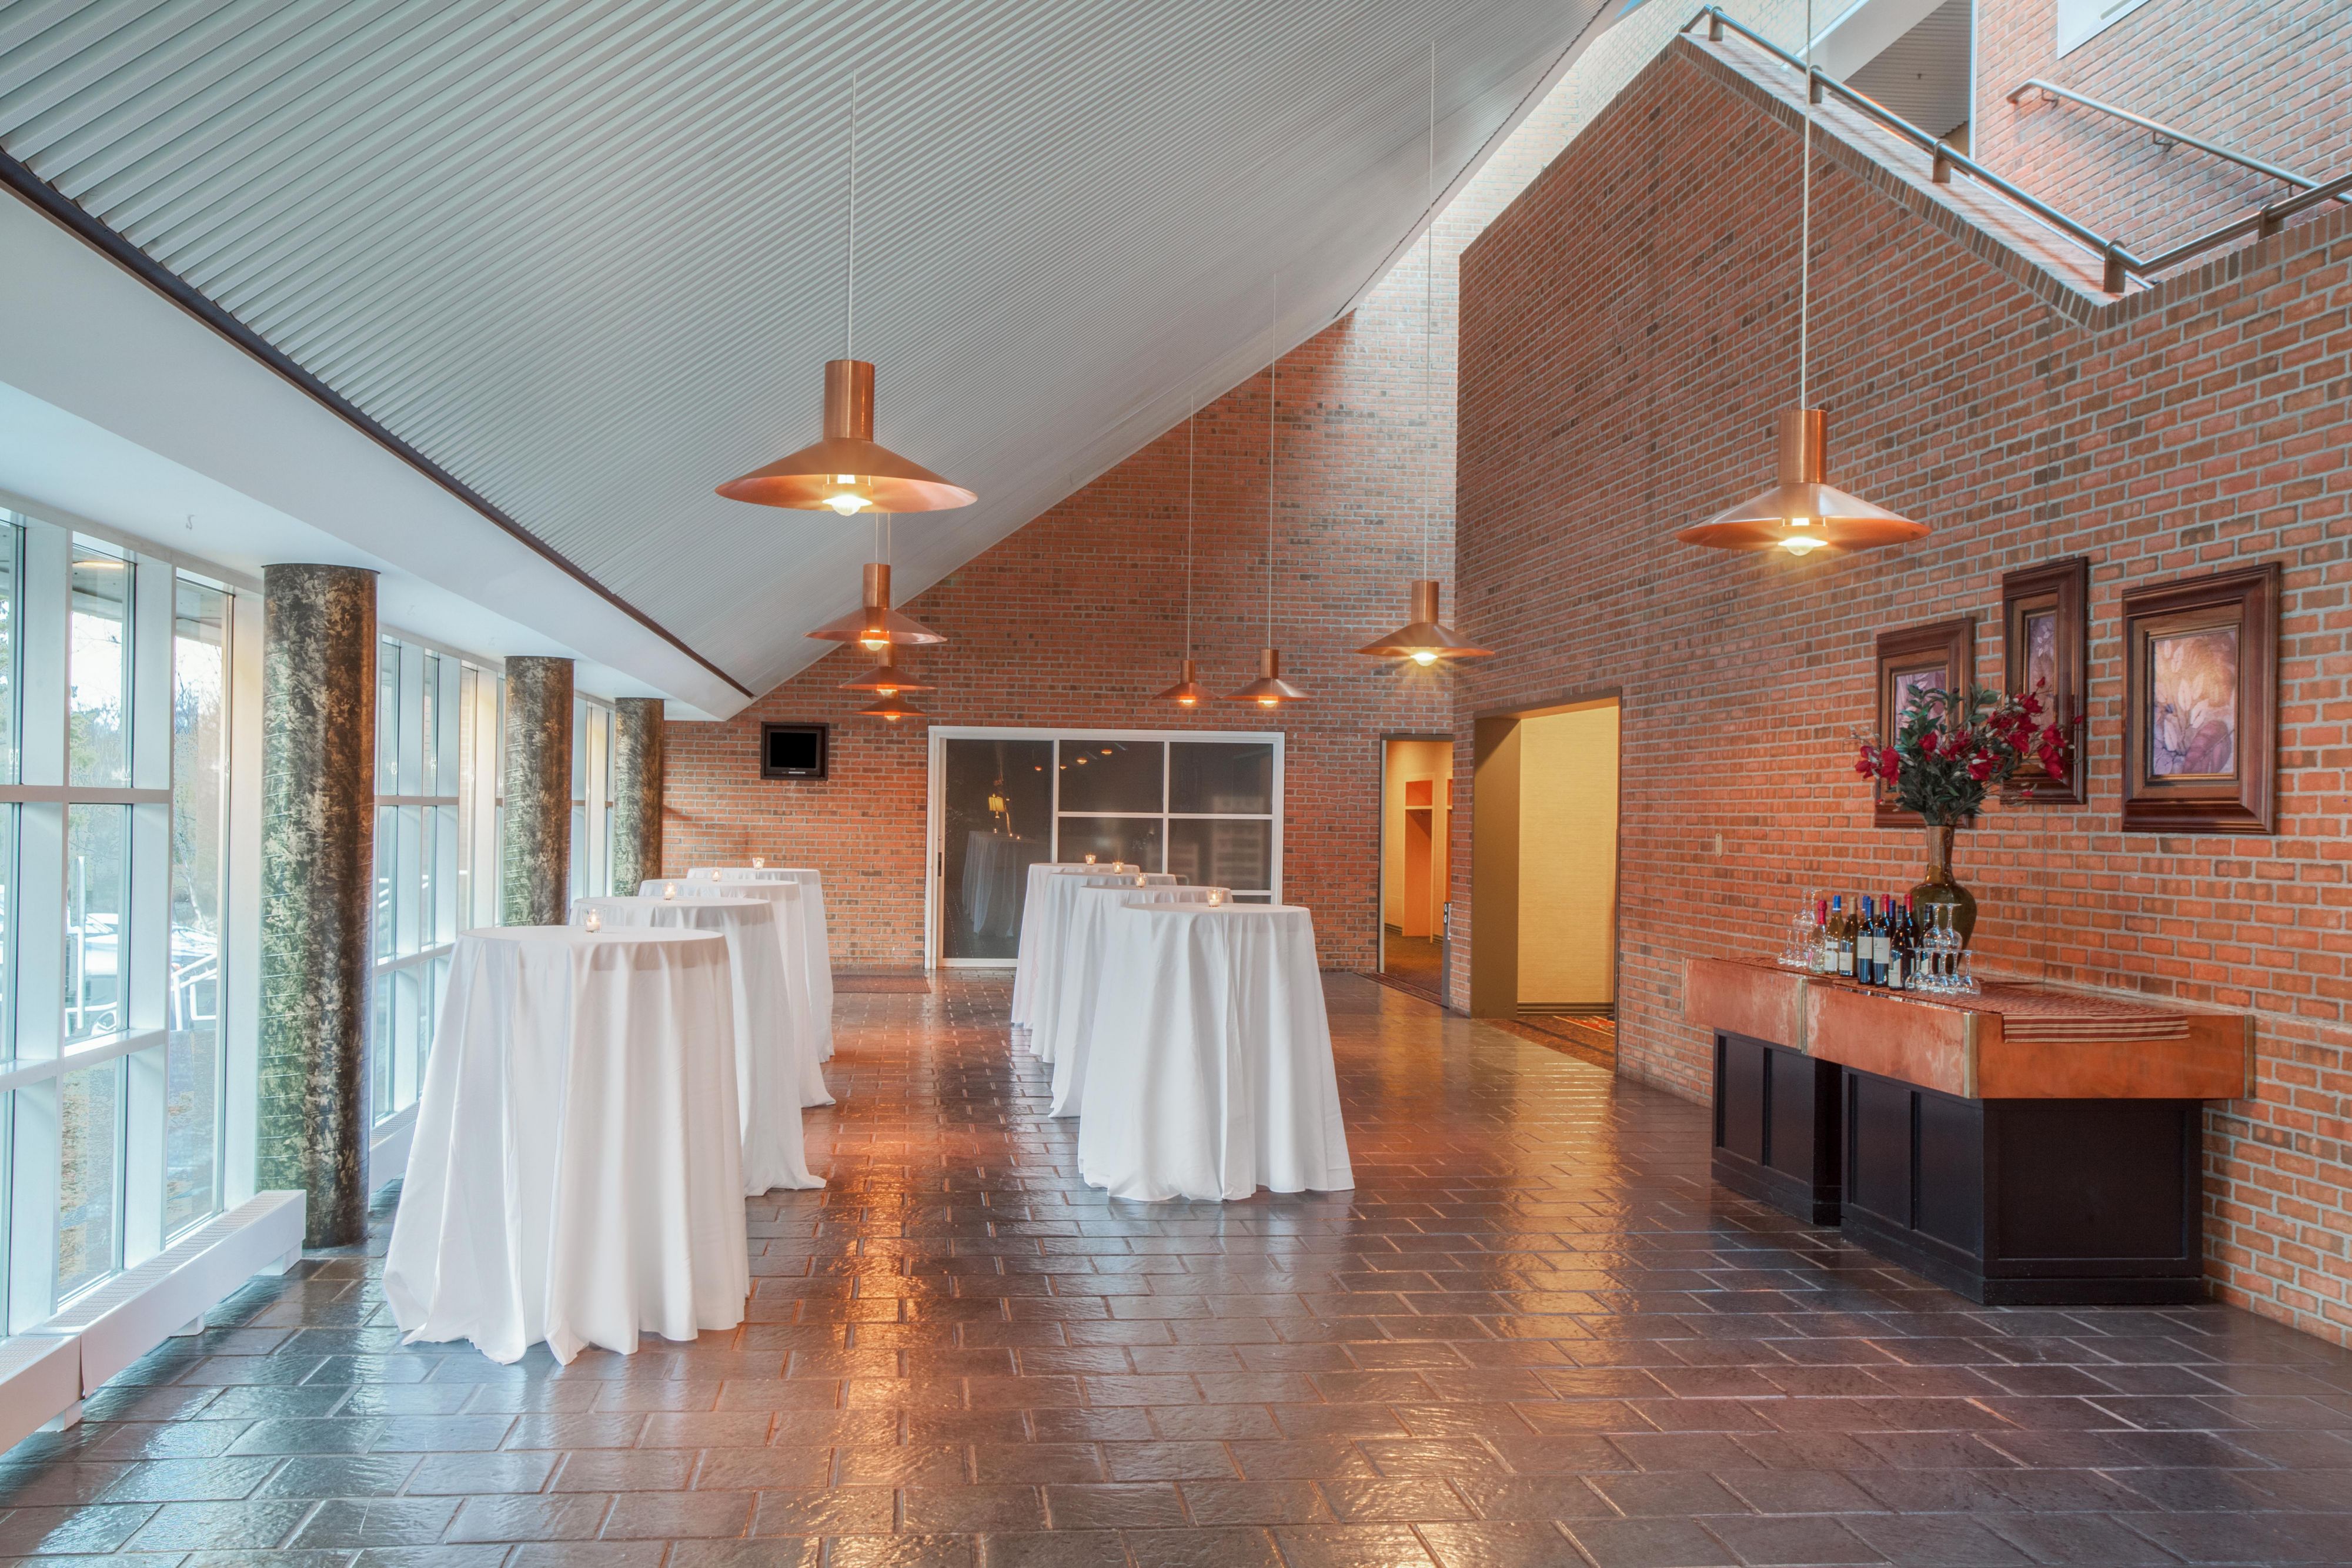 Kiosk meeting room serves as a pre-function space for guests to enjoy a continental breakfast